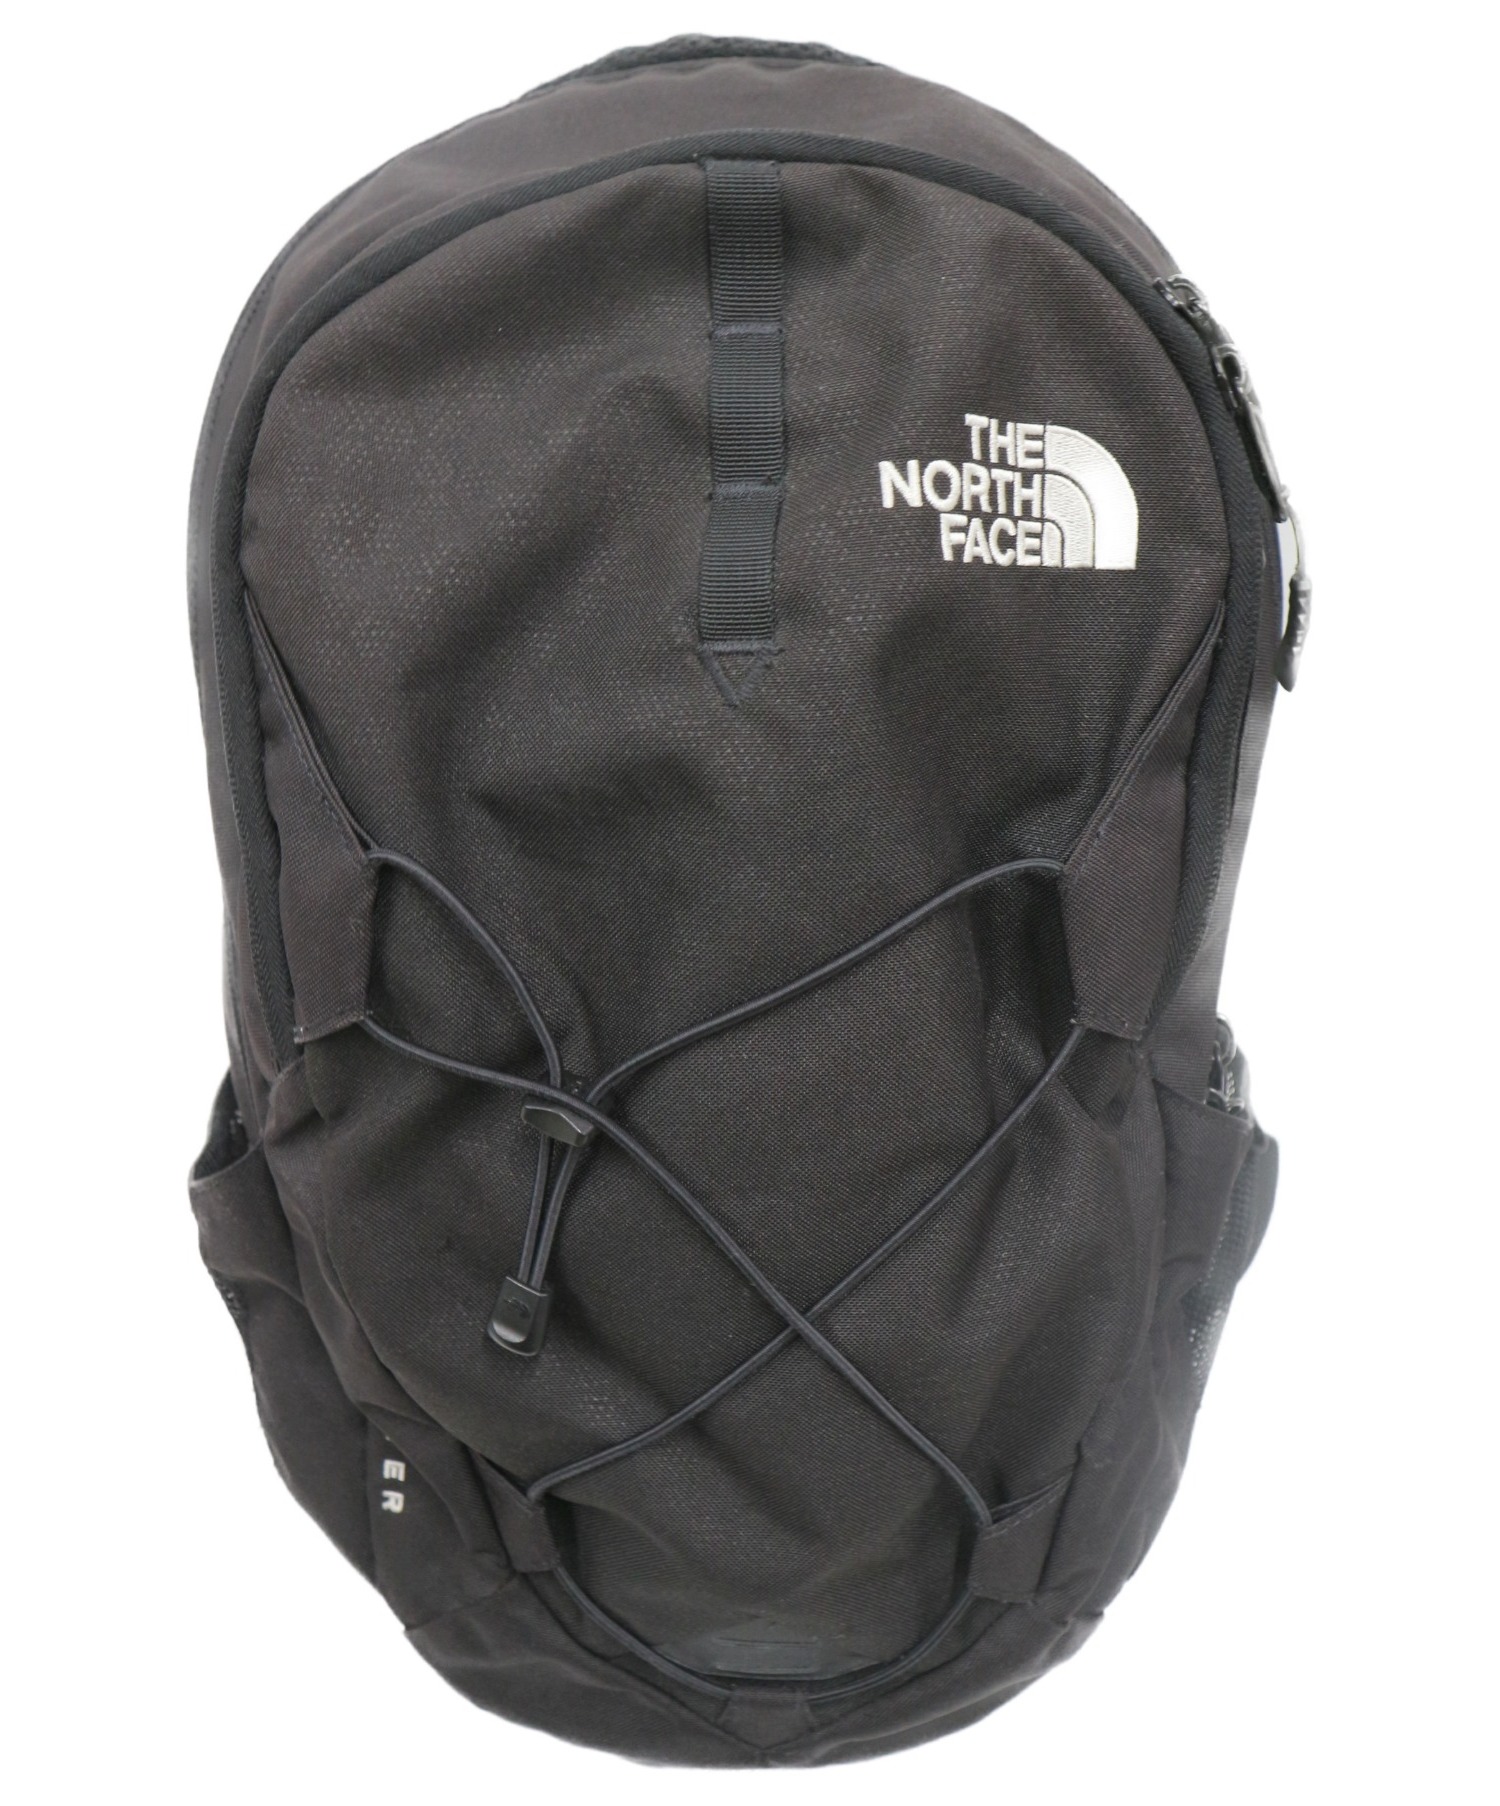 USED ユーズド　THE NORTH FACE JESTER リュック　鞄